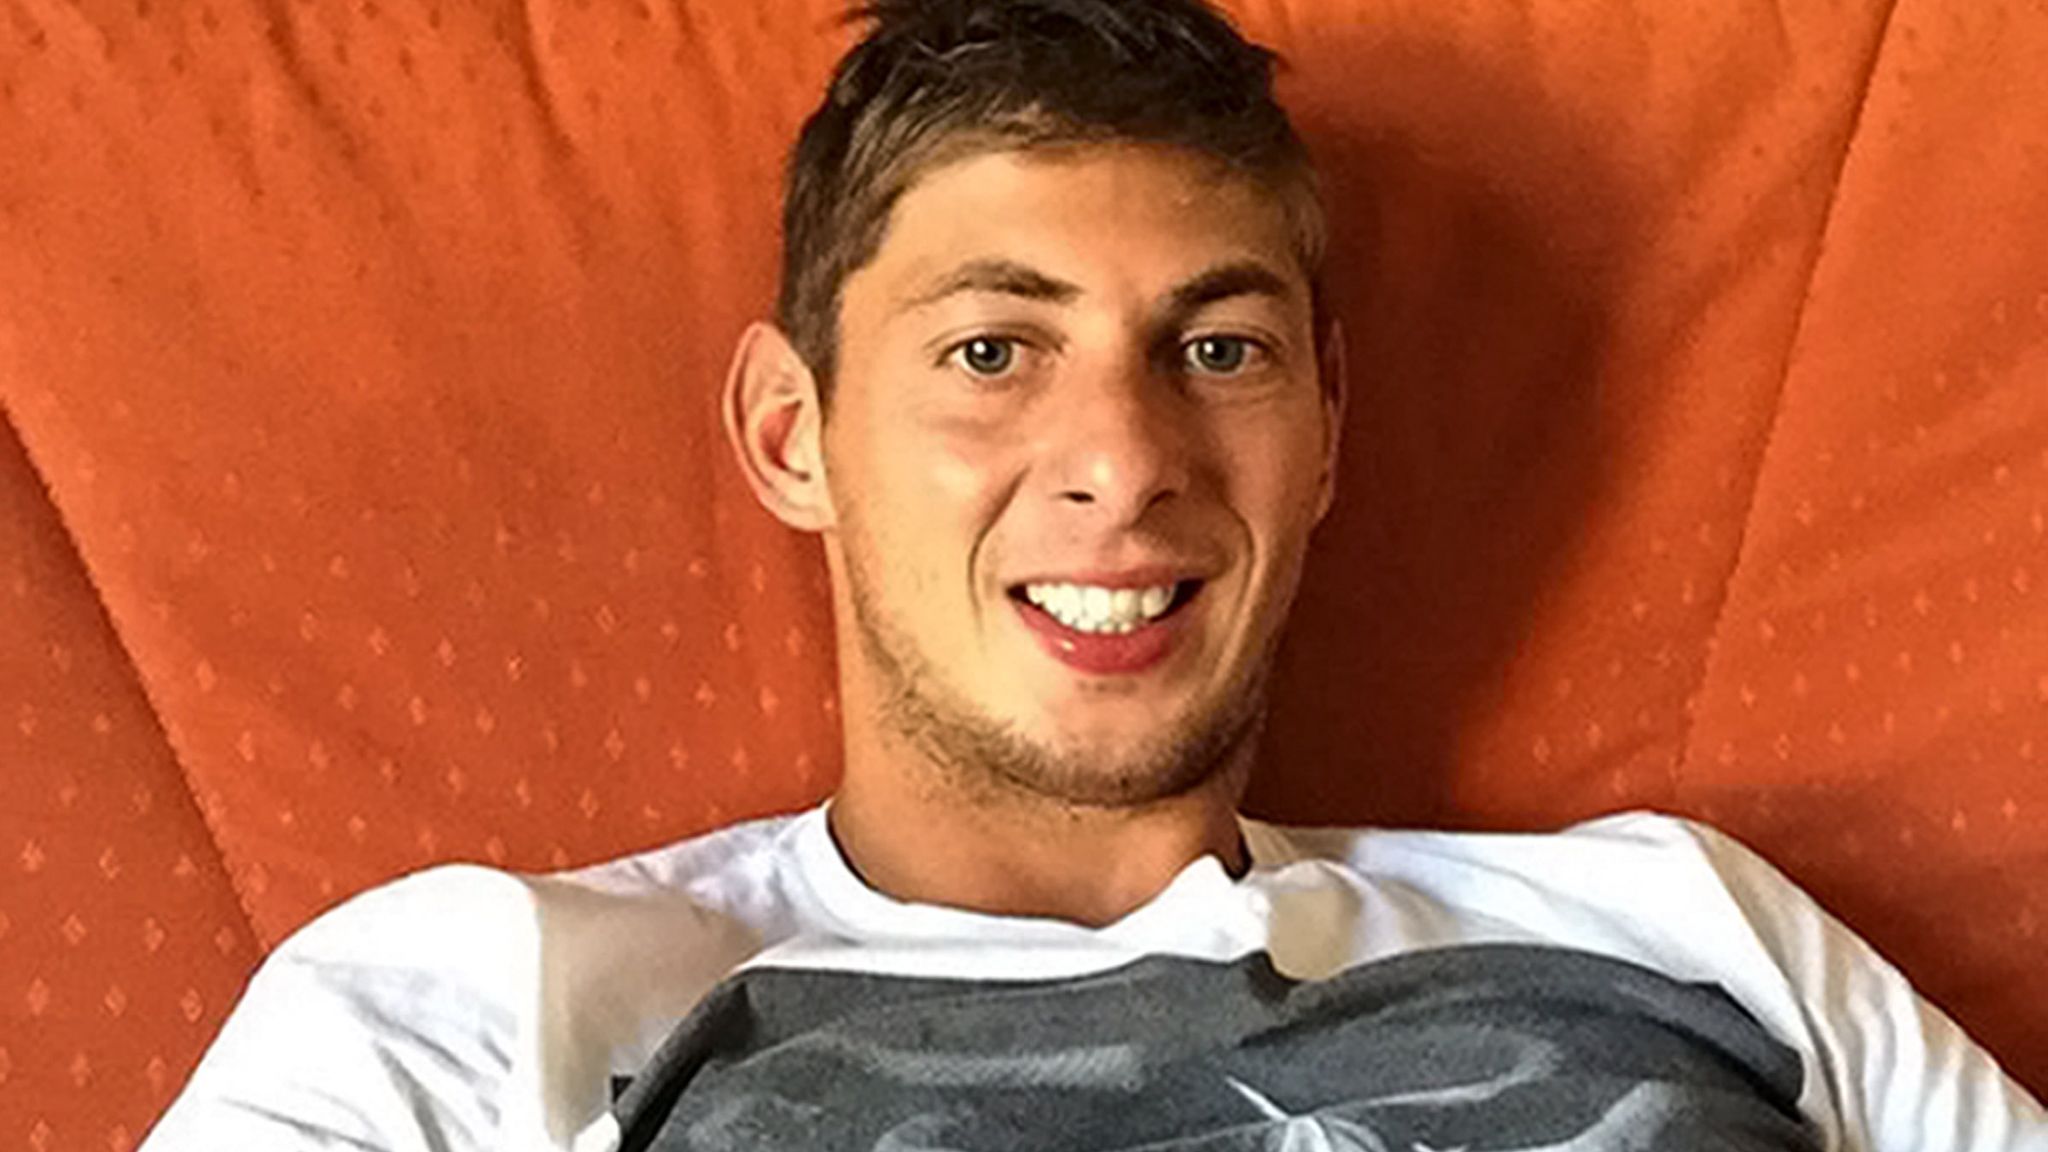 Emiliano Sala Footballer Was Deeply Unconscious From Carbon Monoxide Poisoning Before Plane